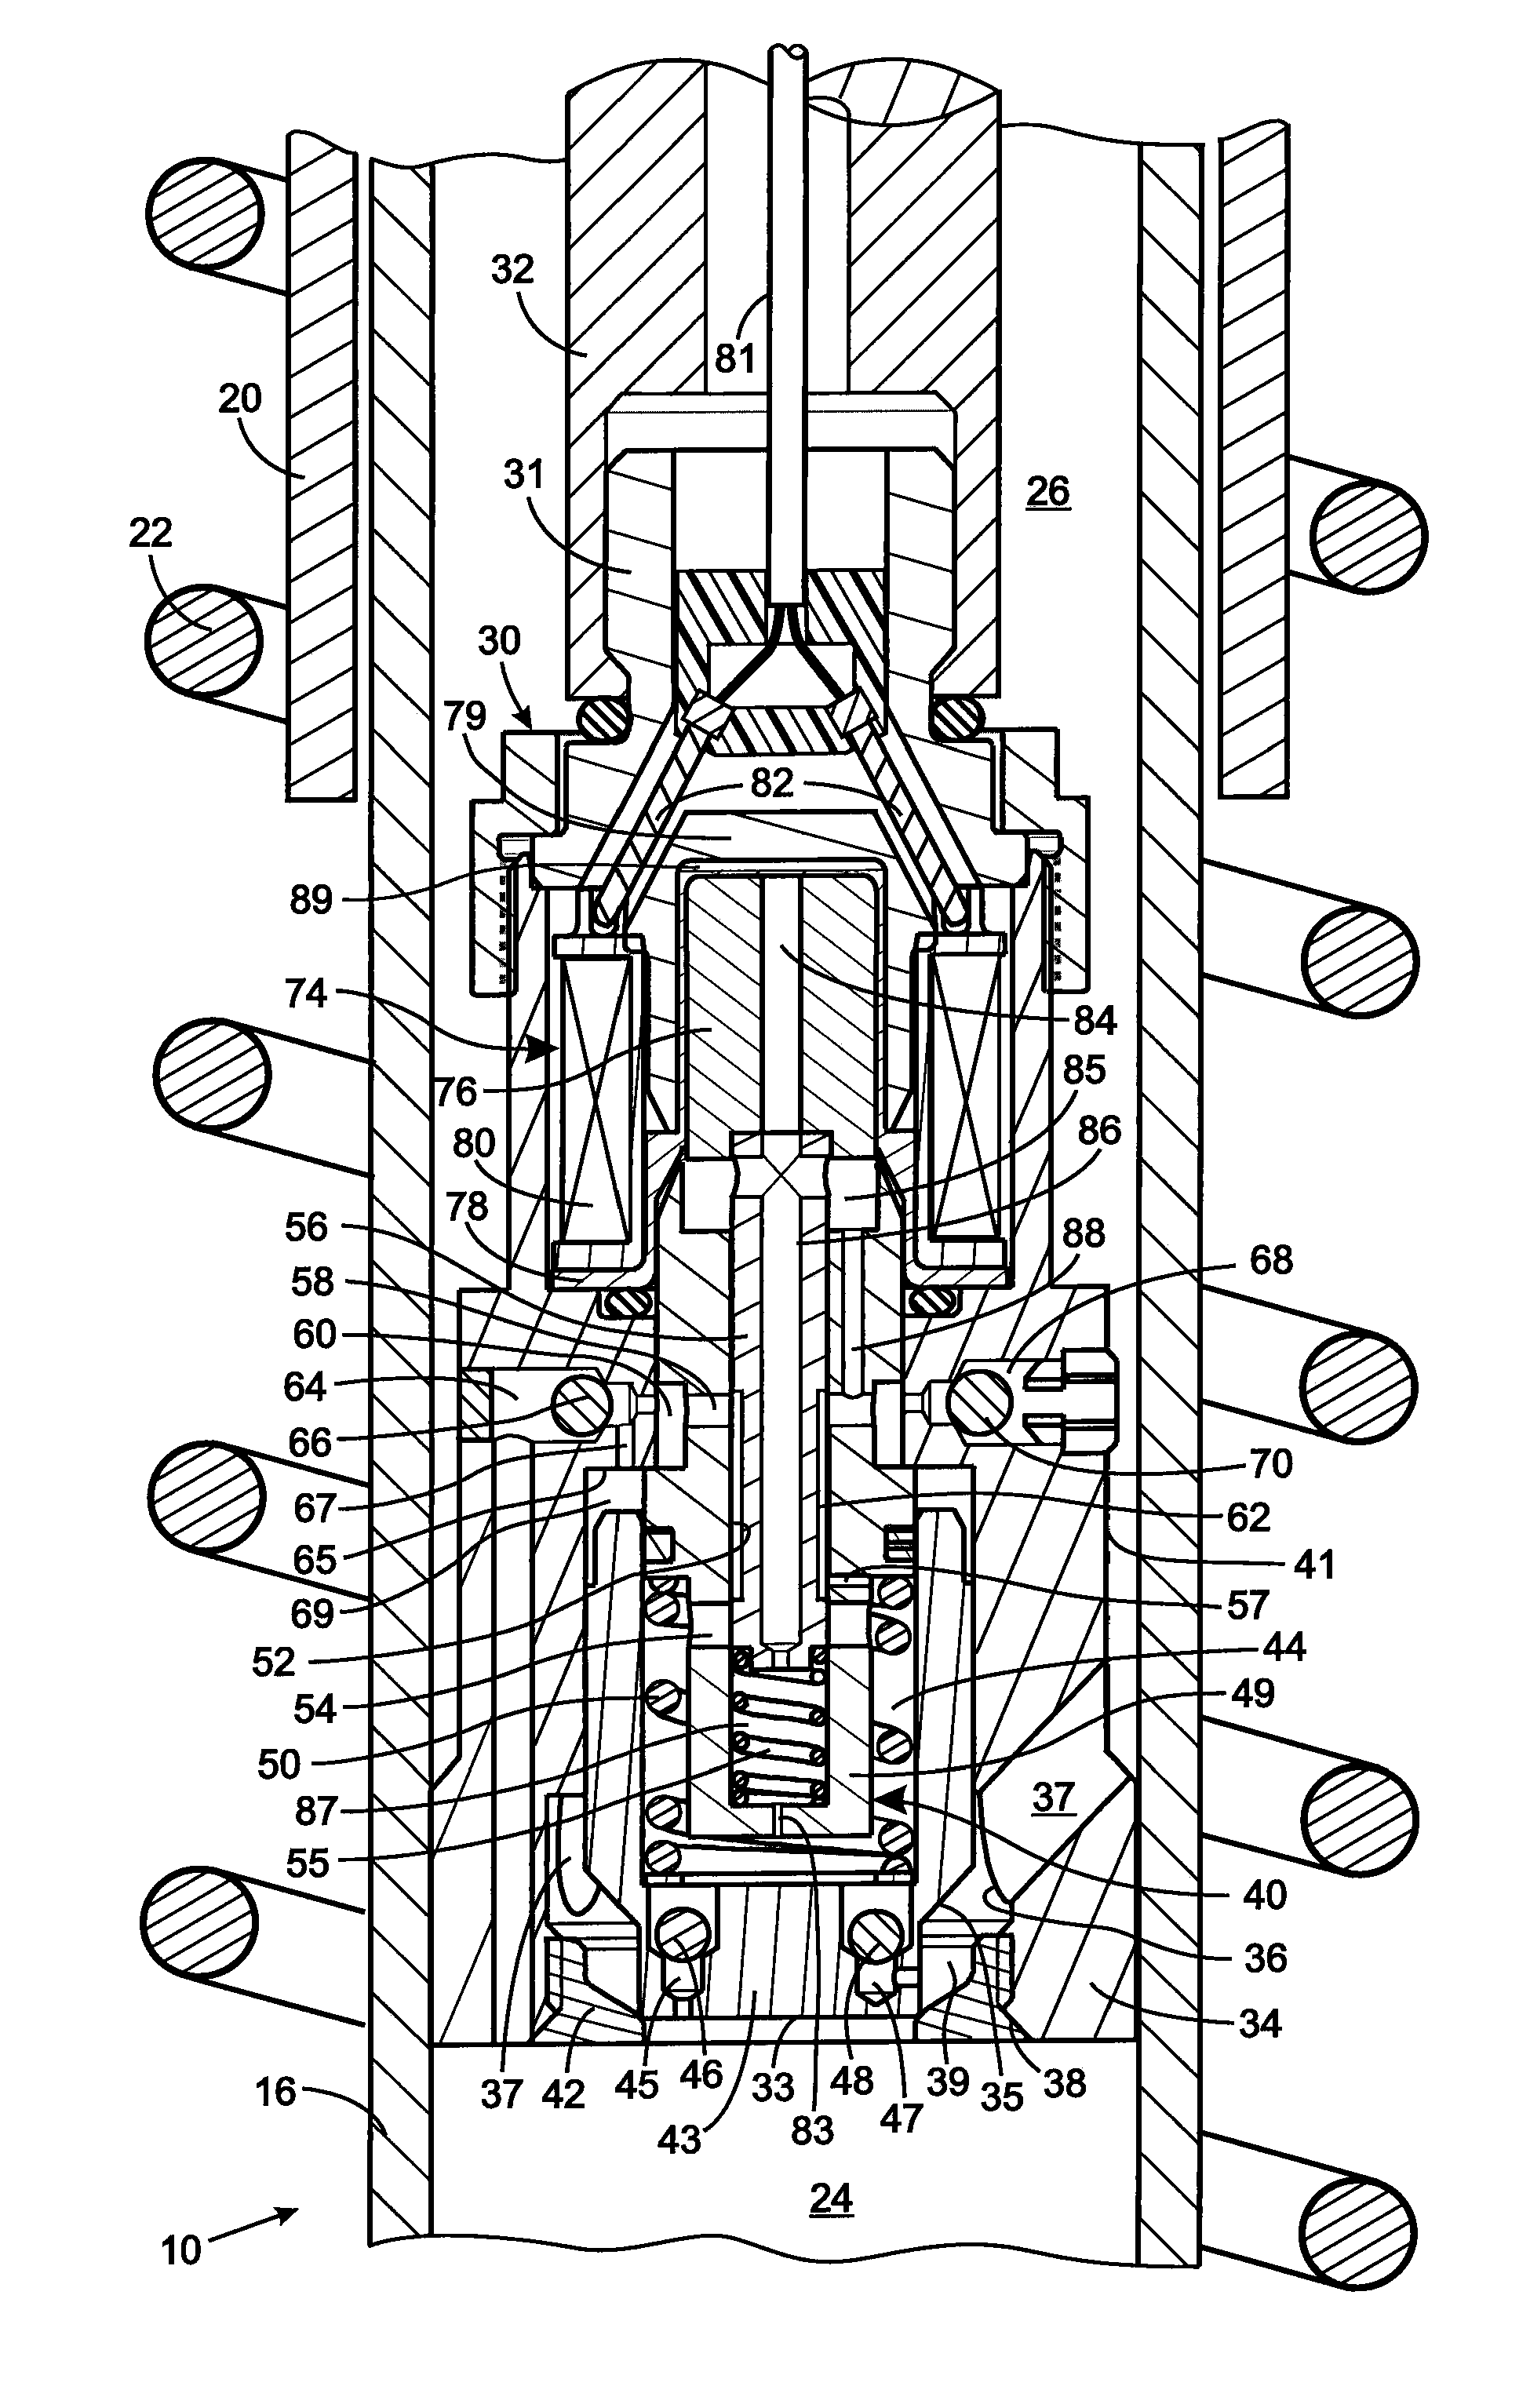 Piston With An Integral Electrically Operated Adjustment Valve For A Hydraulic Vibration Damper